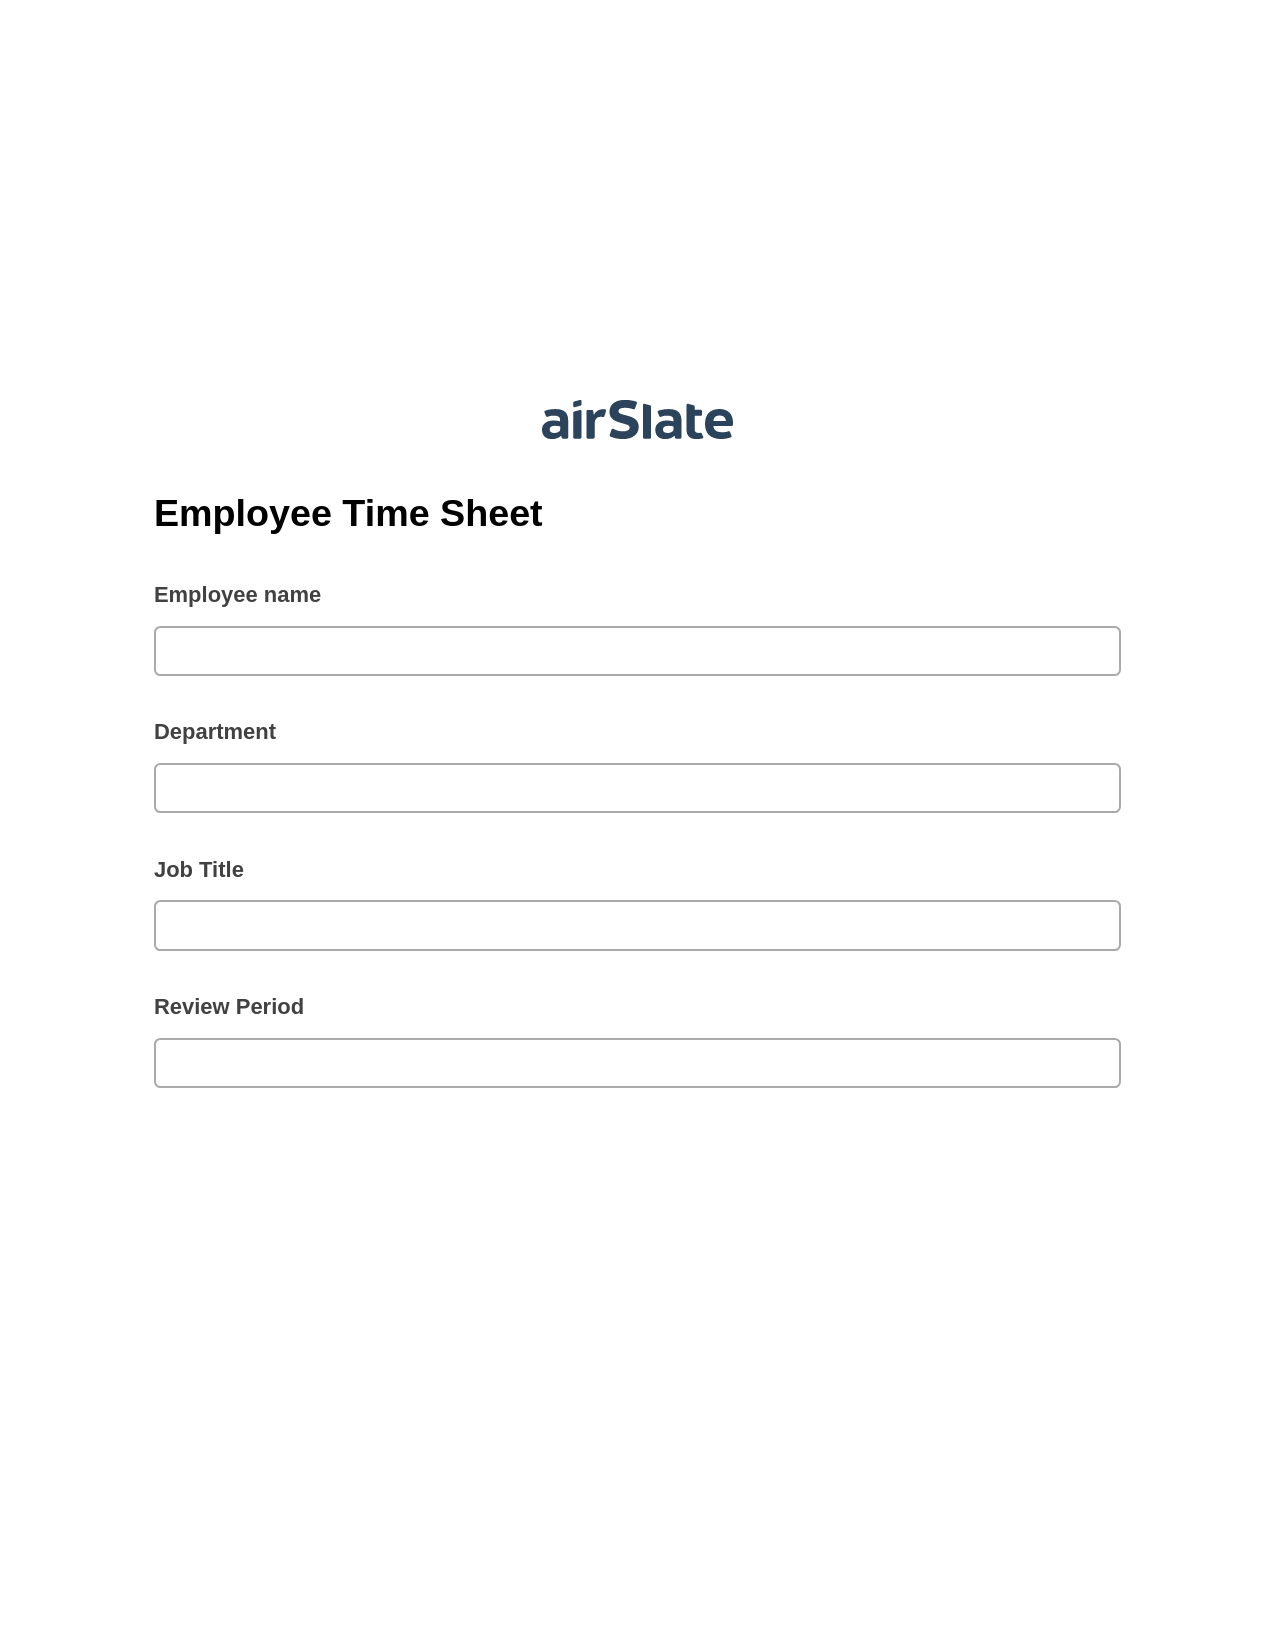 Employee Time Sheet Pre-fill Document Bot, Create Salesforce Records Bot, Export to Smartsheet